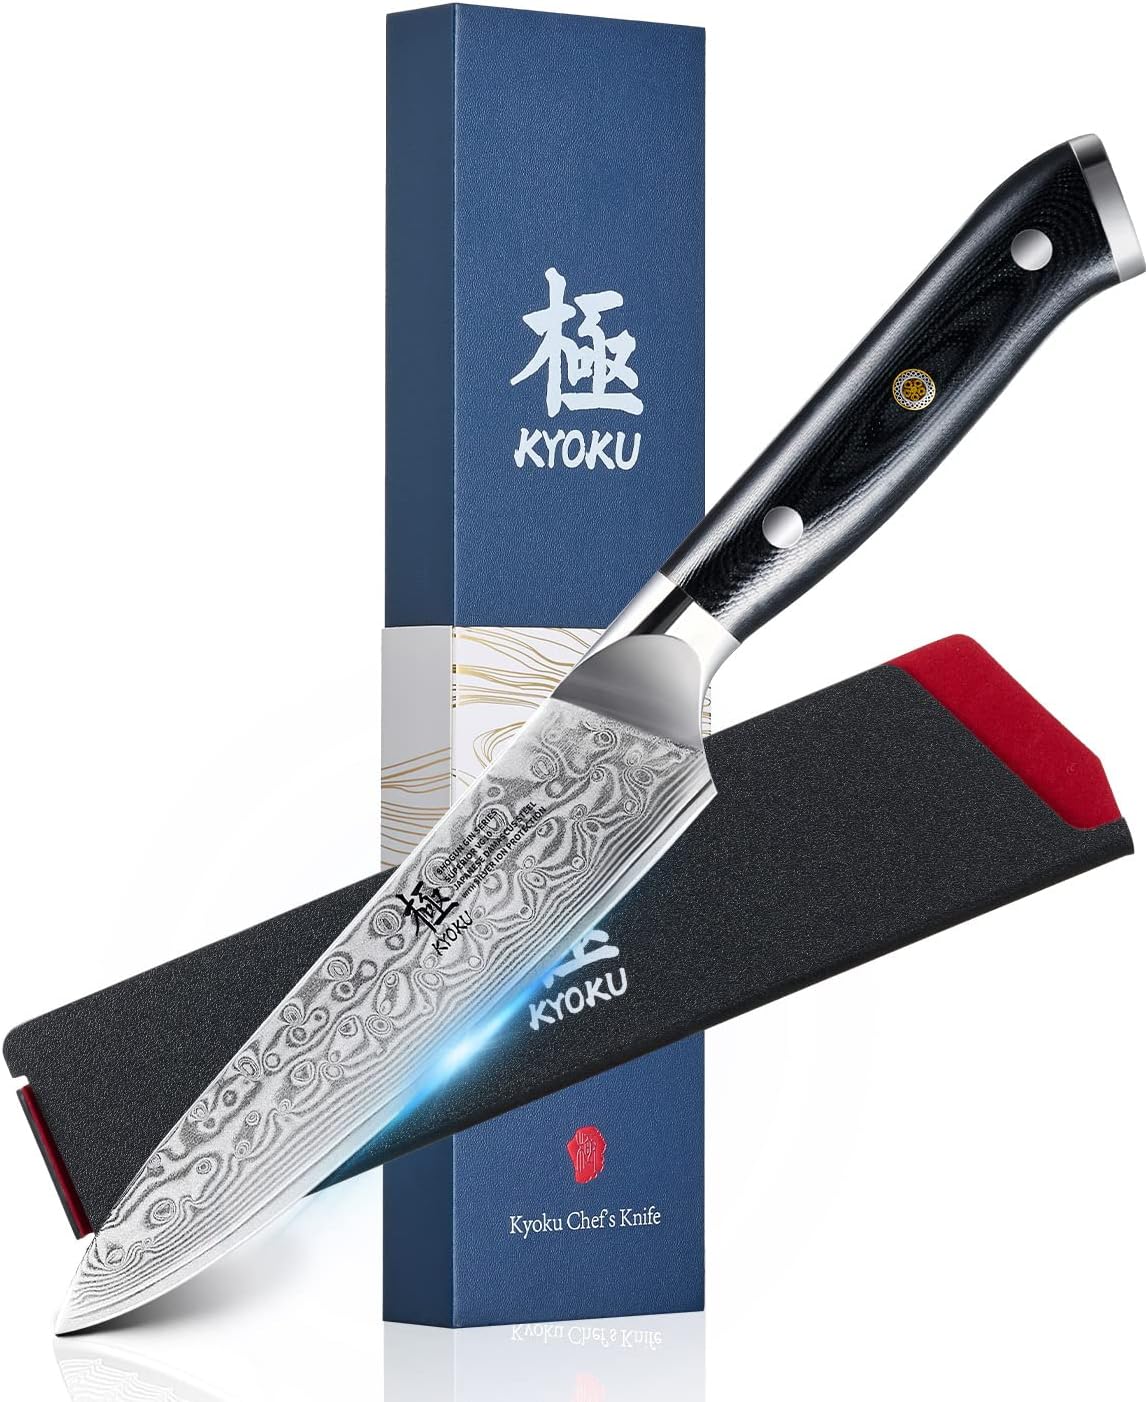 KYOKU Gin Series Utility Knife, 6 Kitchen Knife, Japanese VG10 Damascus Stainless Steel Knife with Silver Ion Blade G10 Handle Mosaic Pin, All Purpose Professional Knife for Meat Veg and Fruit